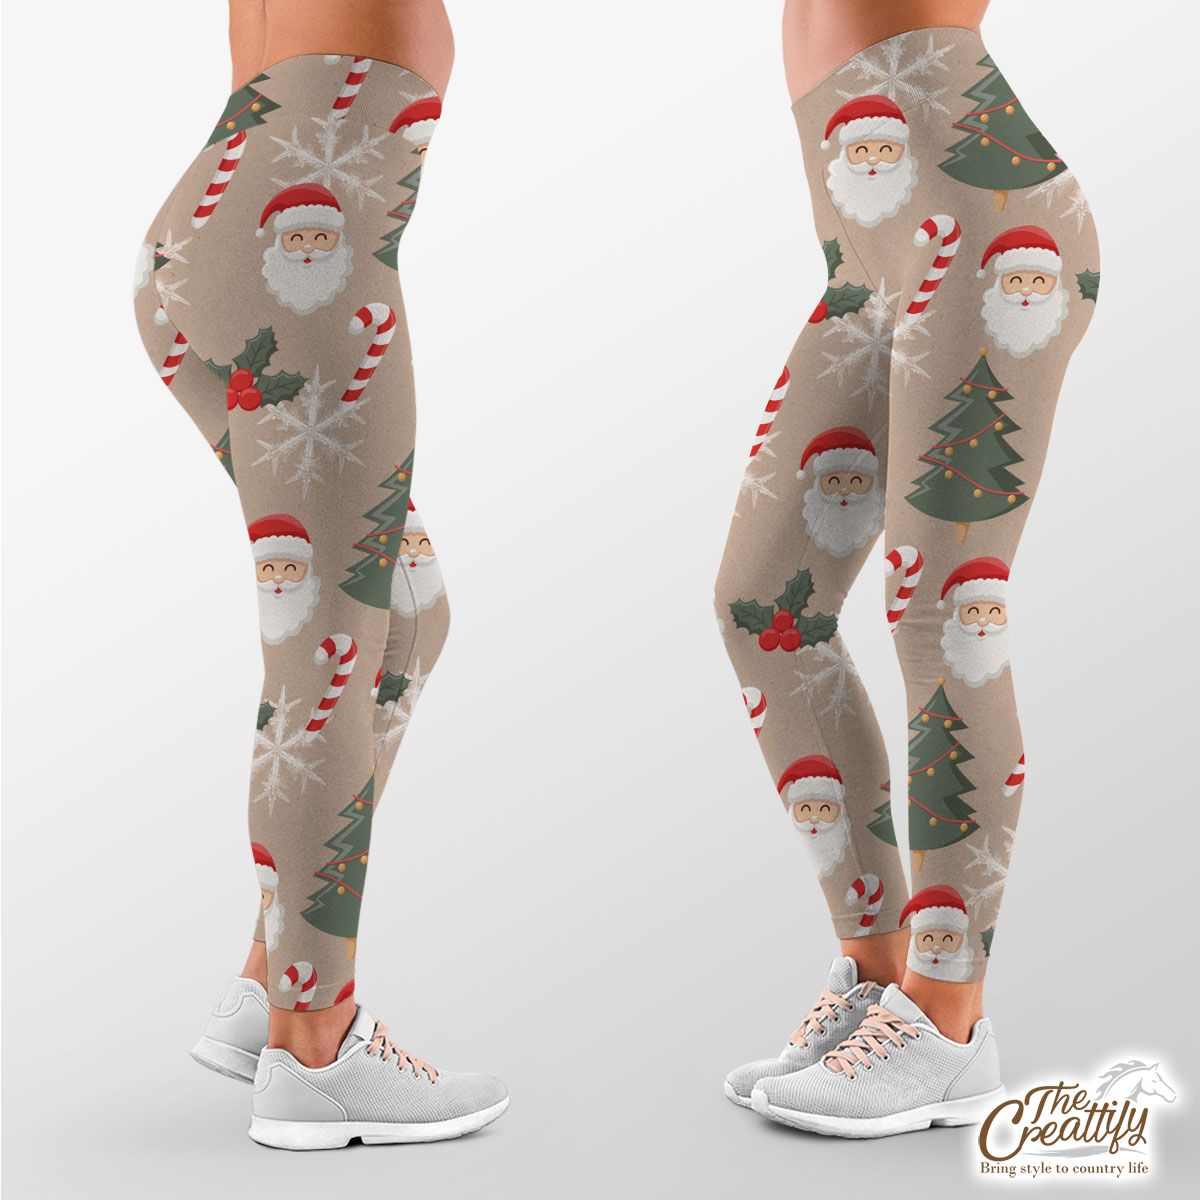 Santa Clause, Christmas Tree, Candy Cane, Holly Leaf On Snowflake Background Legging